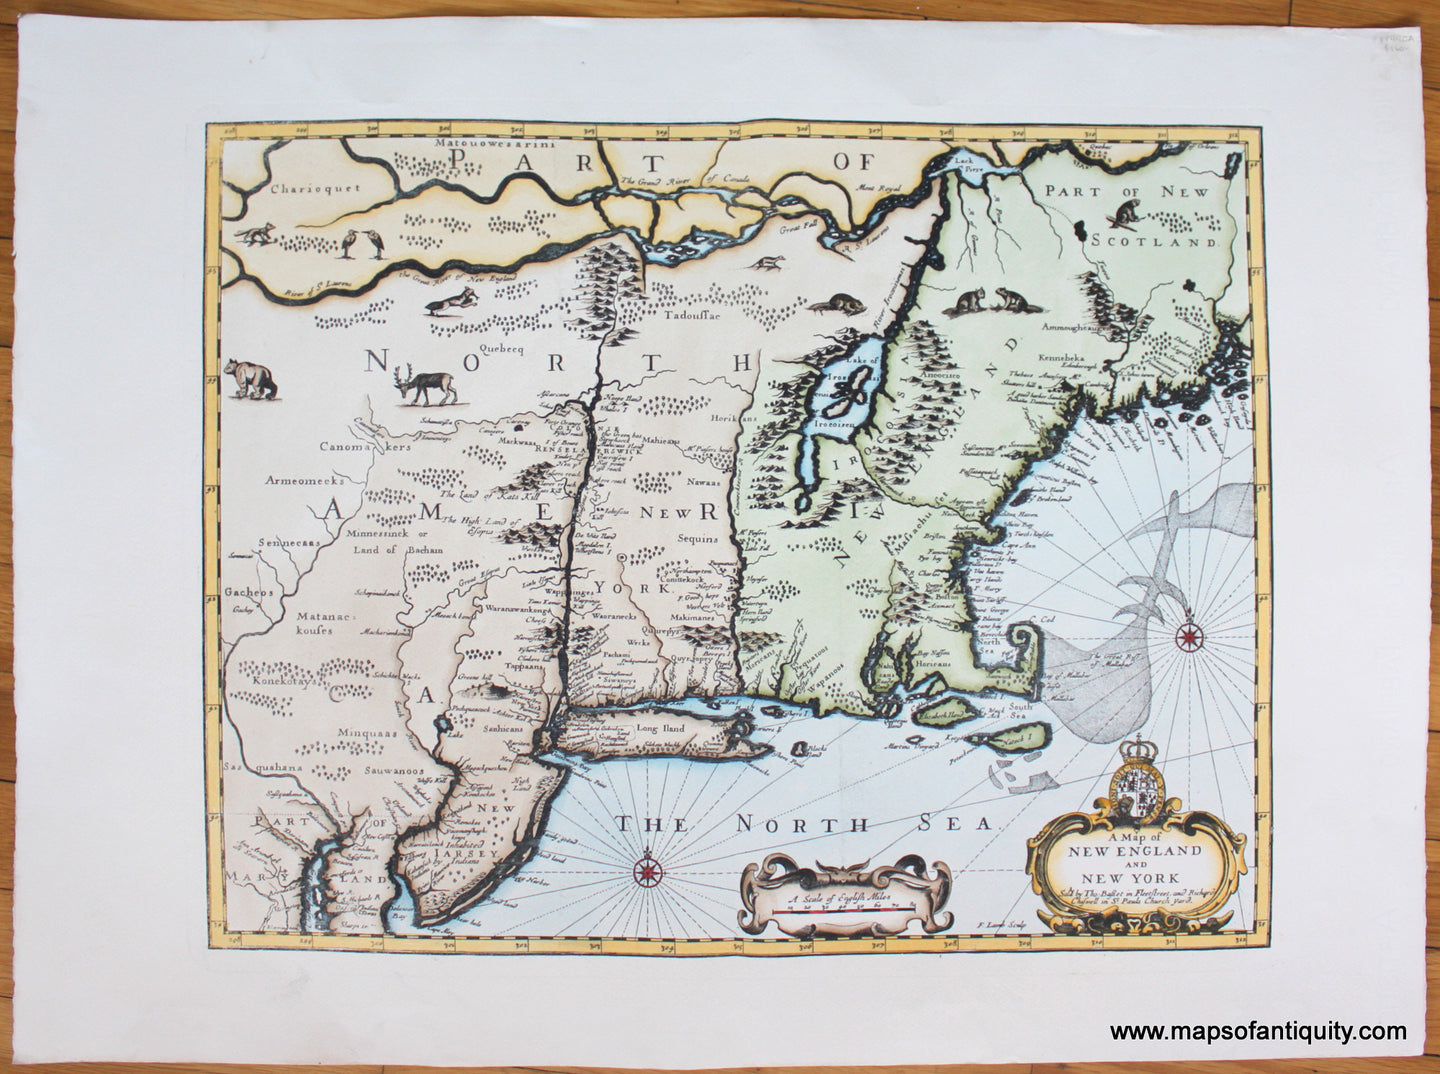 Reproduction-Antique-Maps-Antiquity-A-Map-of-New-England-and-New-York-1676-John-Speed-17th-Century